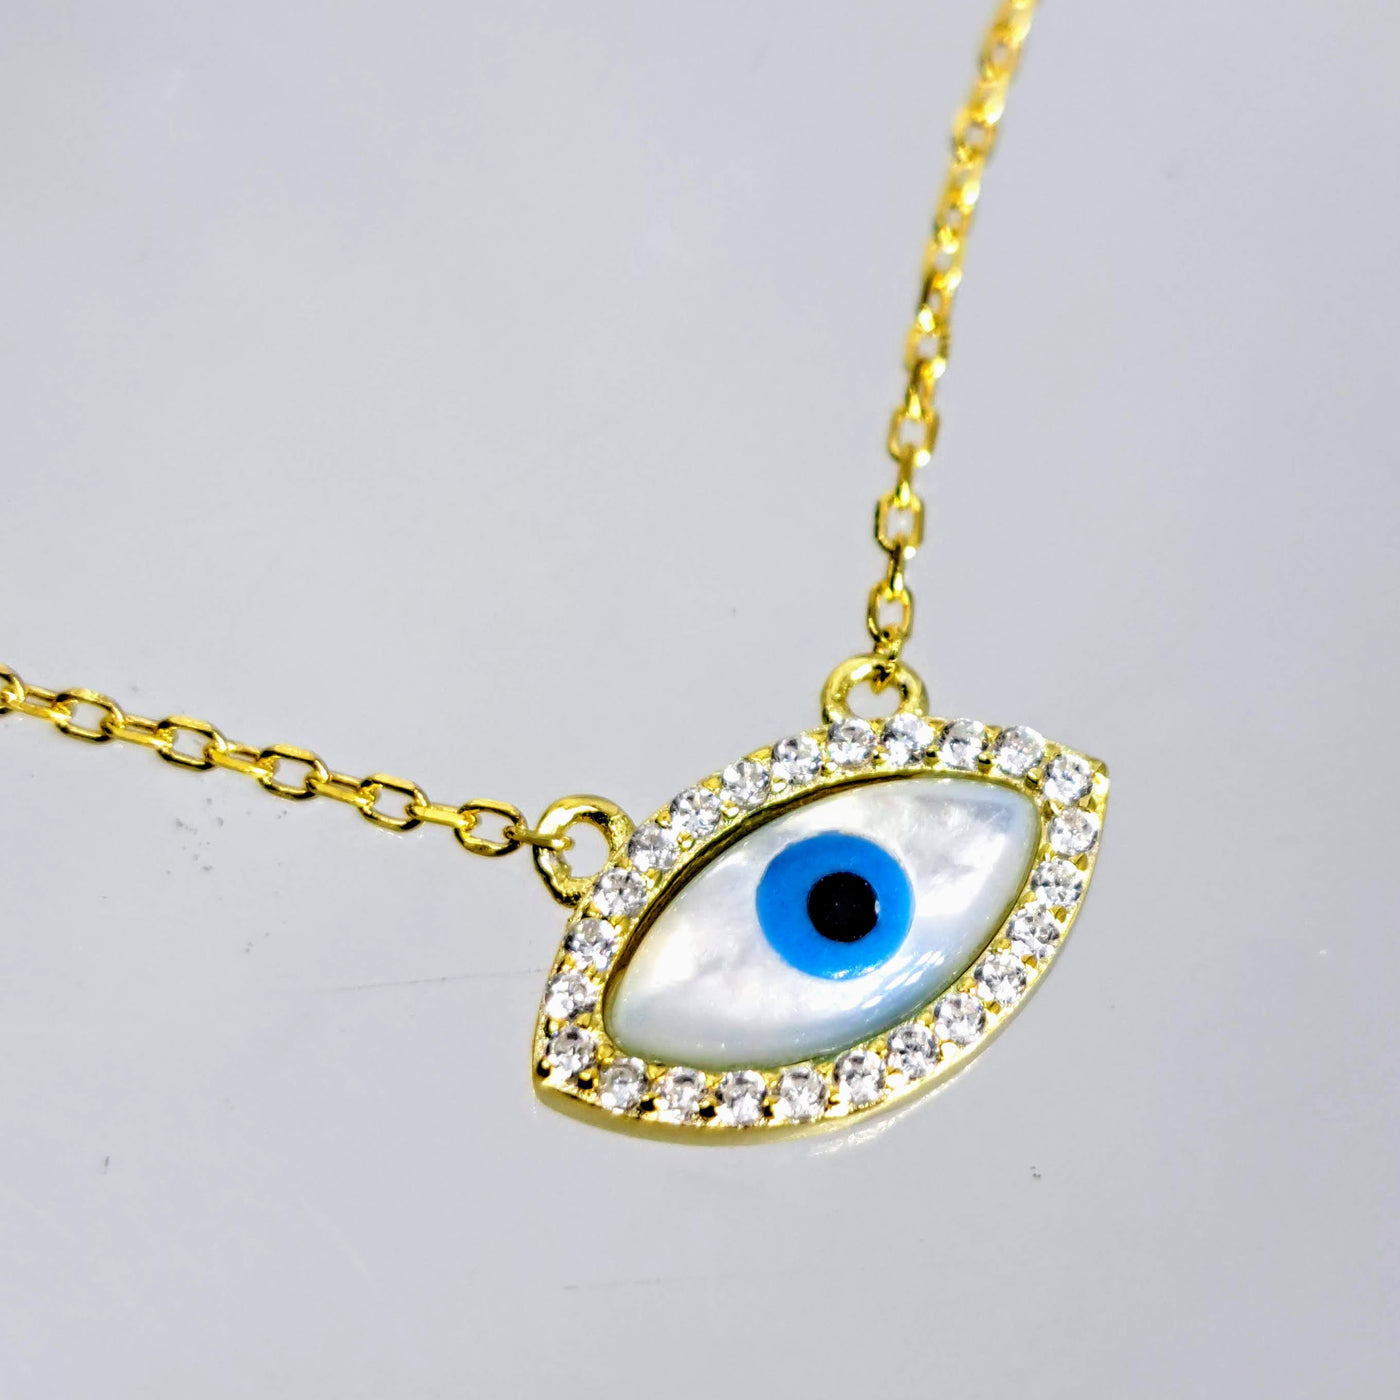 "Eye On You!" 16" - 18" Necklace - Mother Of Pearl, Enamel, 18K Gold Sterling